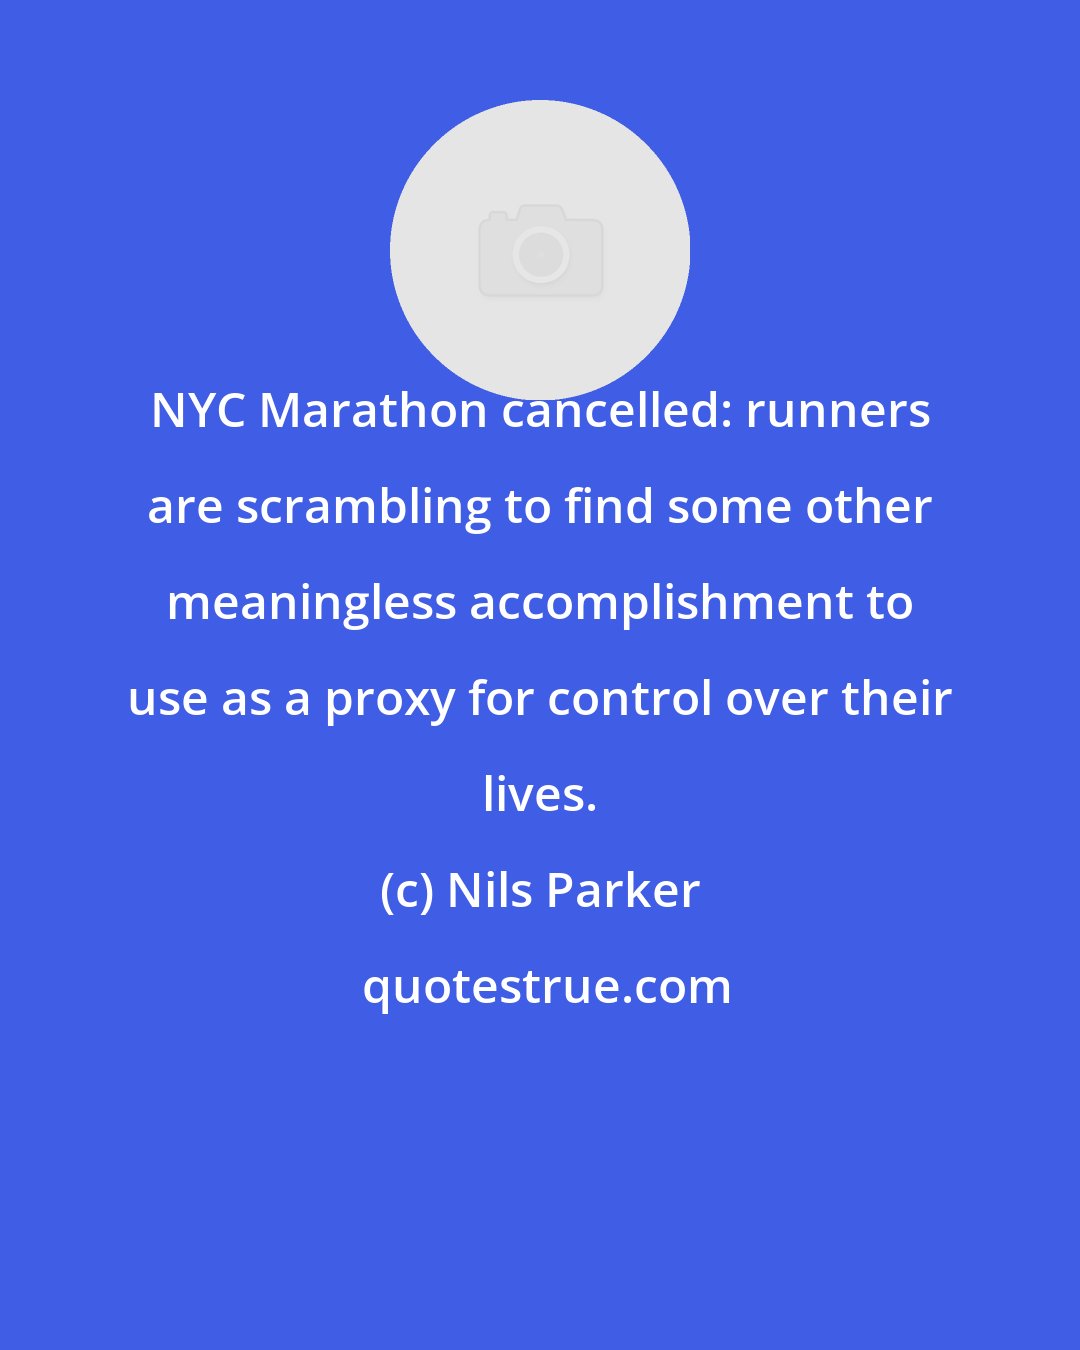 Nils Parker: NYC Marathon cancelled: runners are scrambling to find some other meaningless accomplishment to use as a proxy for control over their lives.